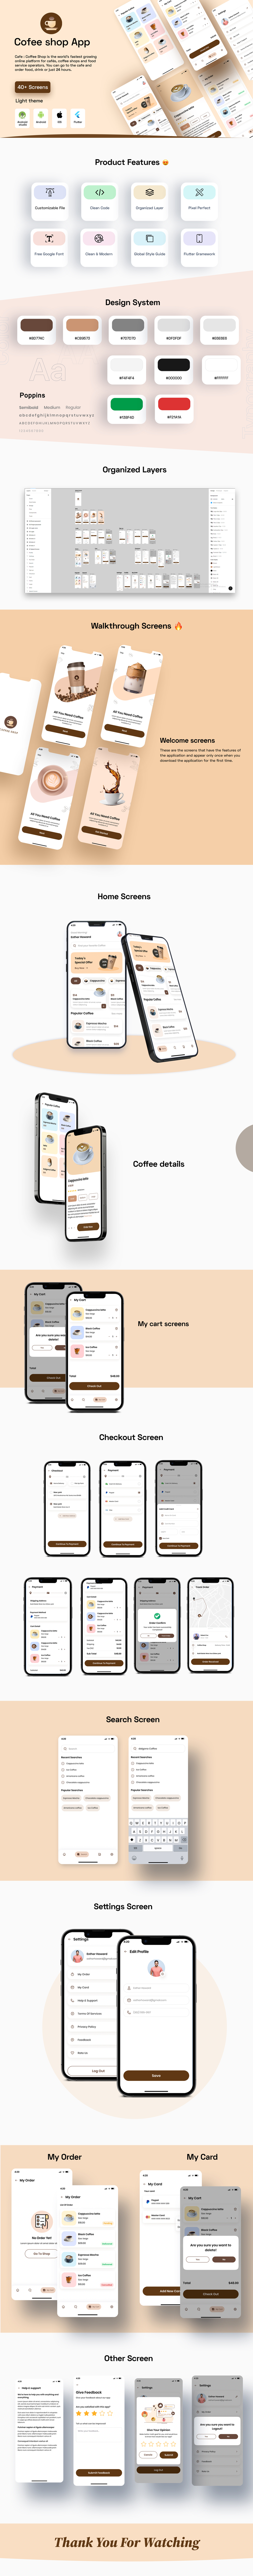 Cafe : Coffee Shop App template | Coffee Order App | Flutter (Android, iOS) app - 4